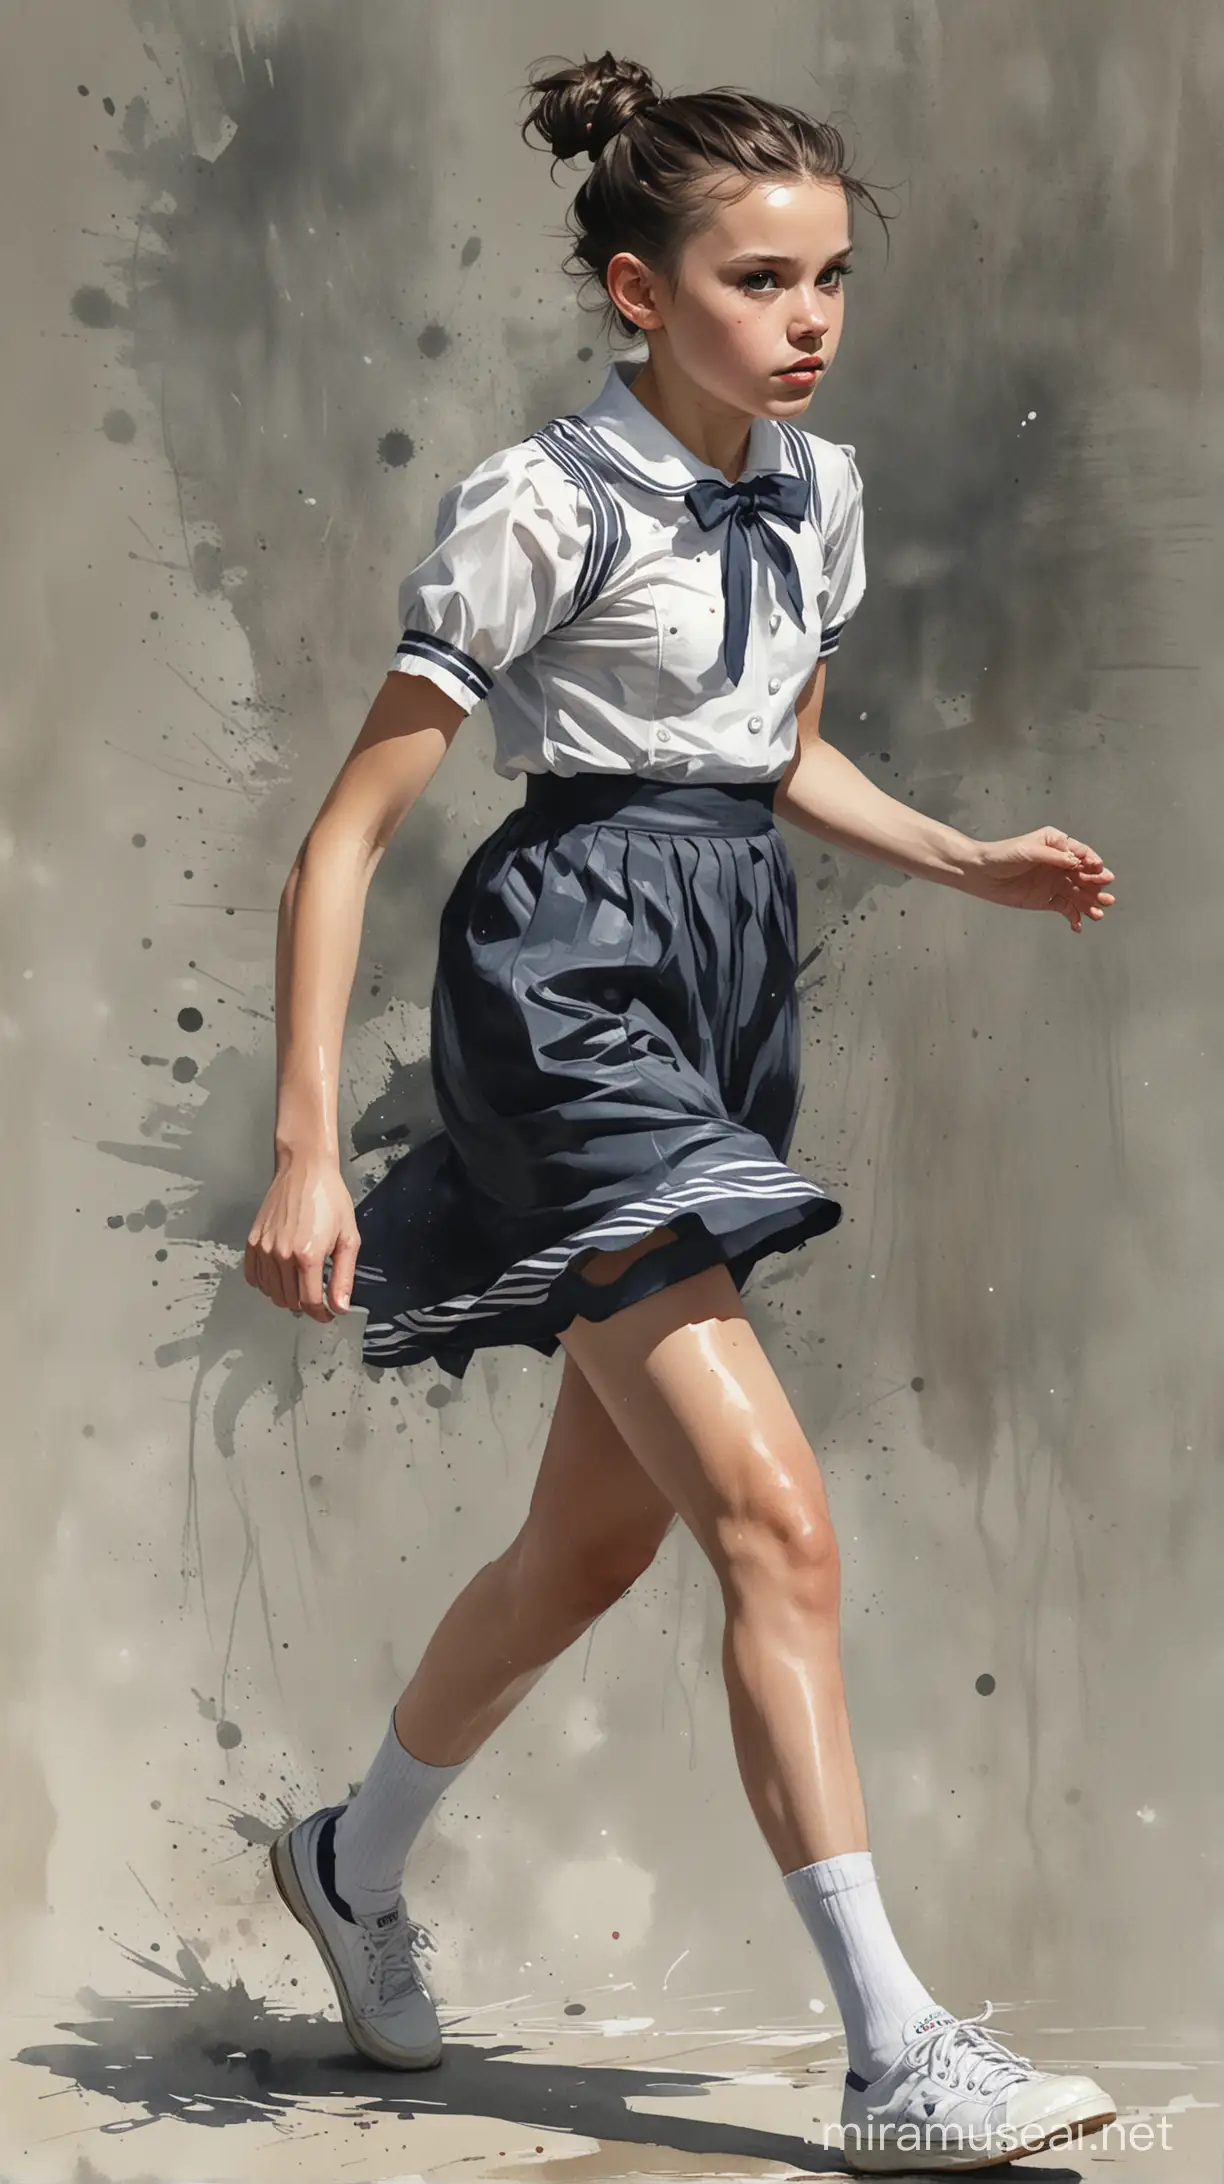 Preteen Girl in Sailor School Dress Running with Smooth Shapely Legs Alex Maleev Inspired Illustration